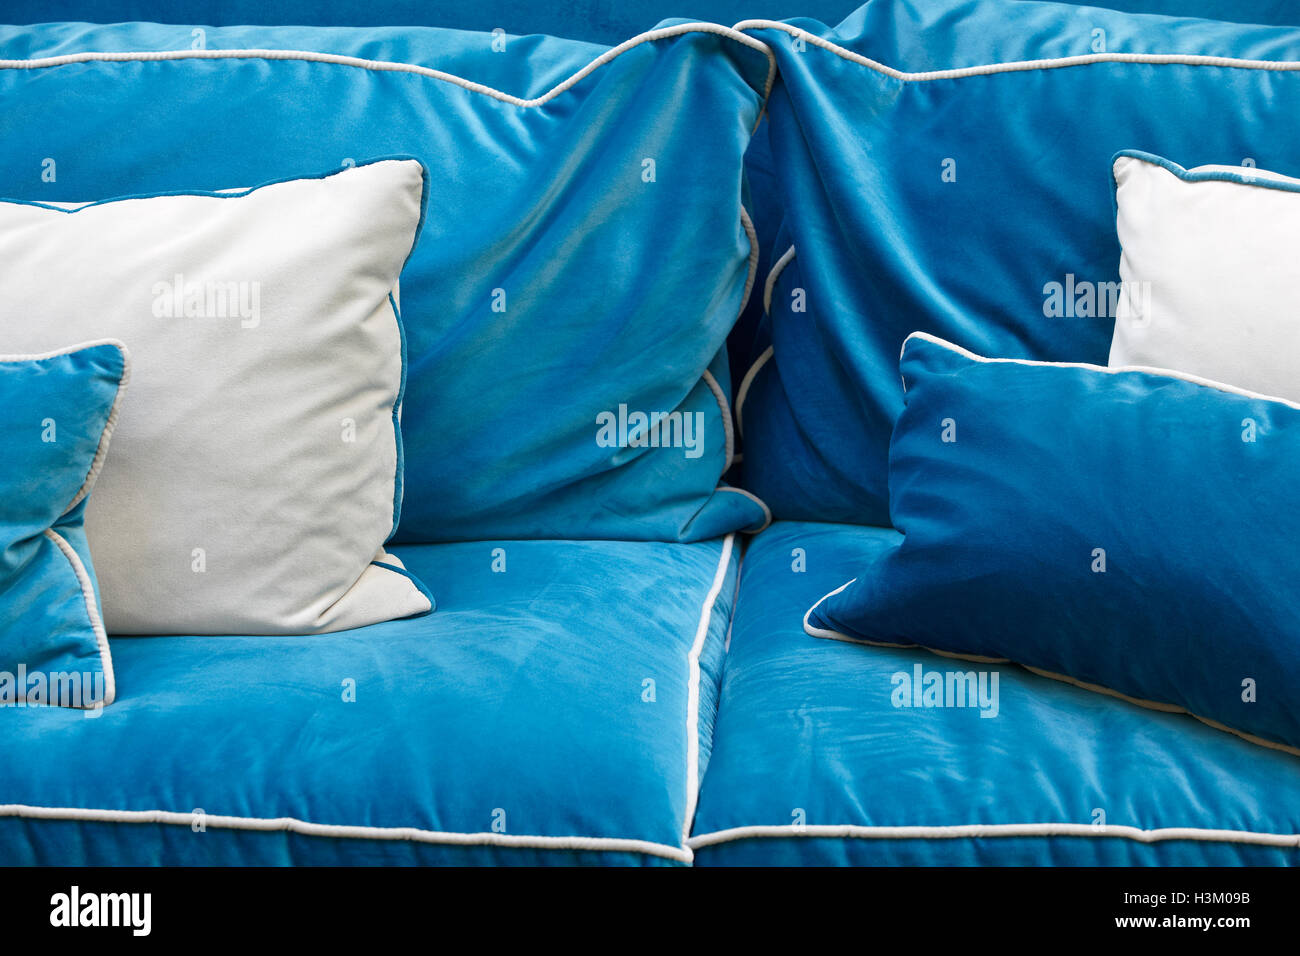 Sofa detail in blue tone with cushions. Horizontal Stock Photo